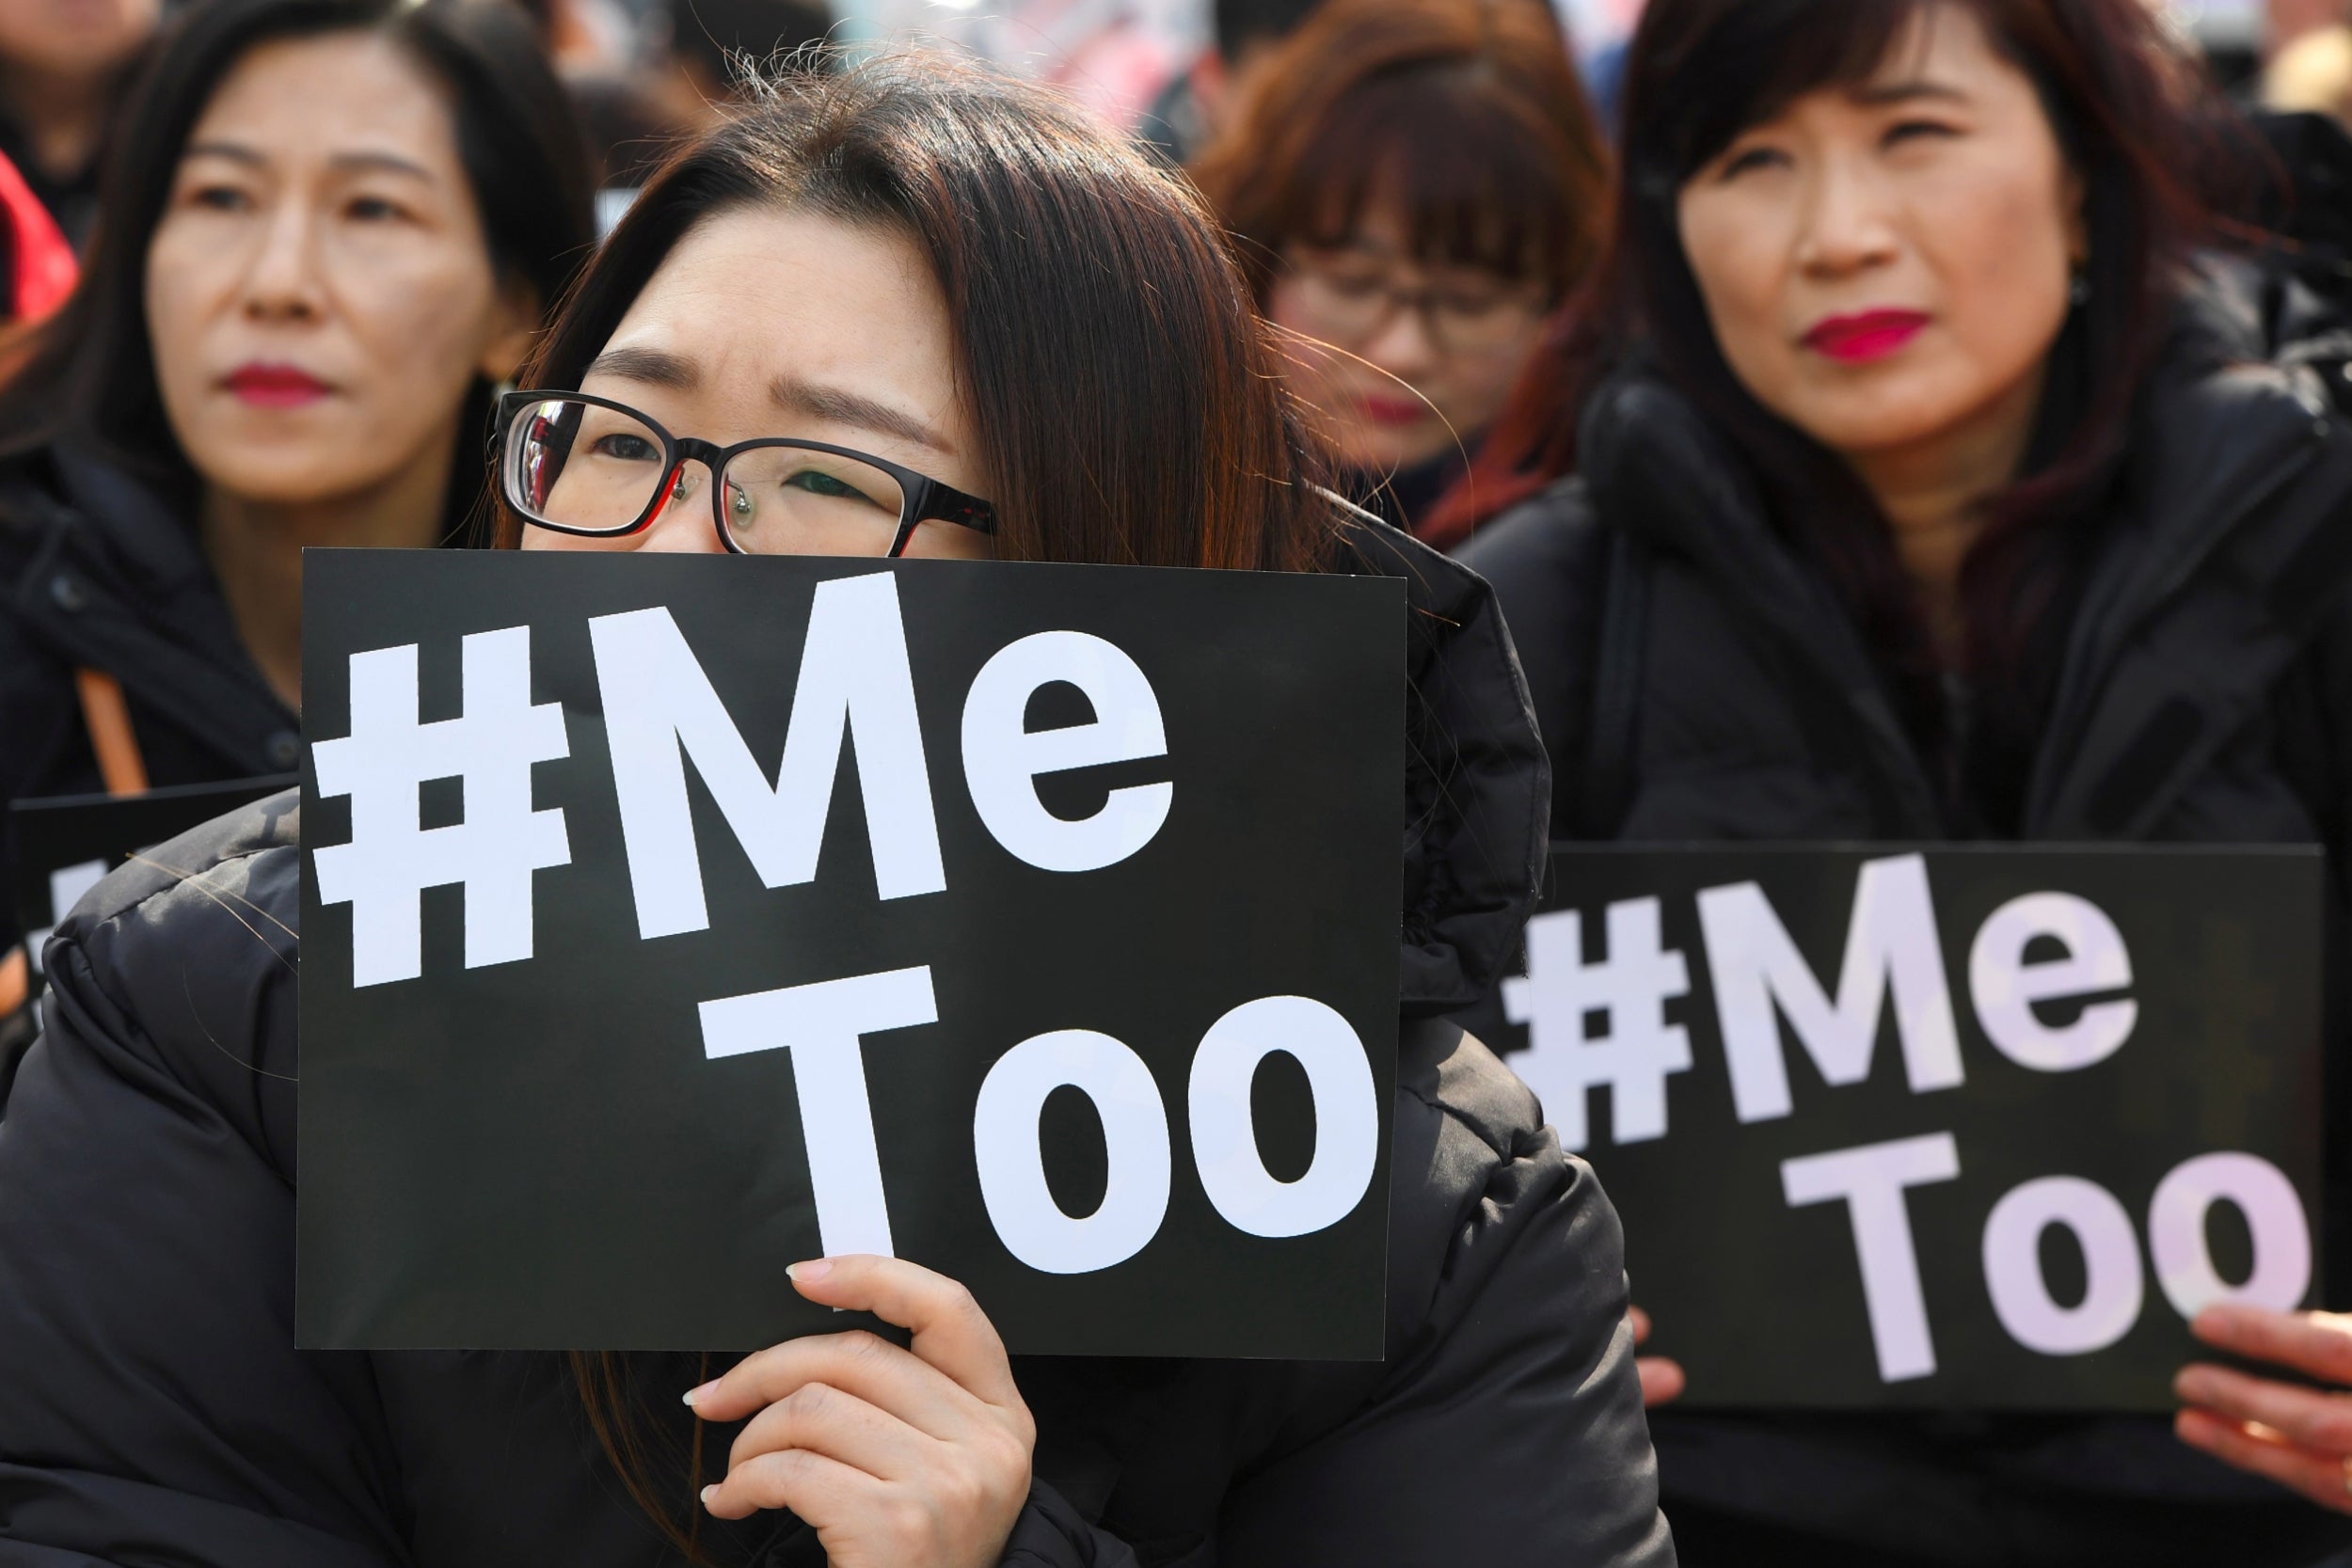 The petition notes that evidence demonstrates women face repeated threats of rape and sexual assault on social media platforms